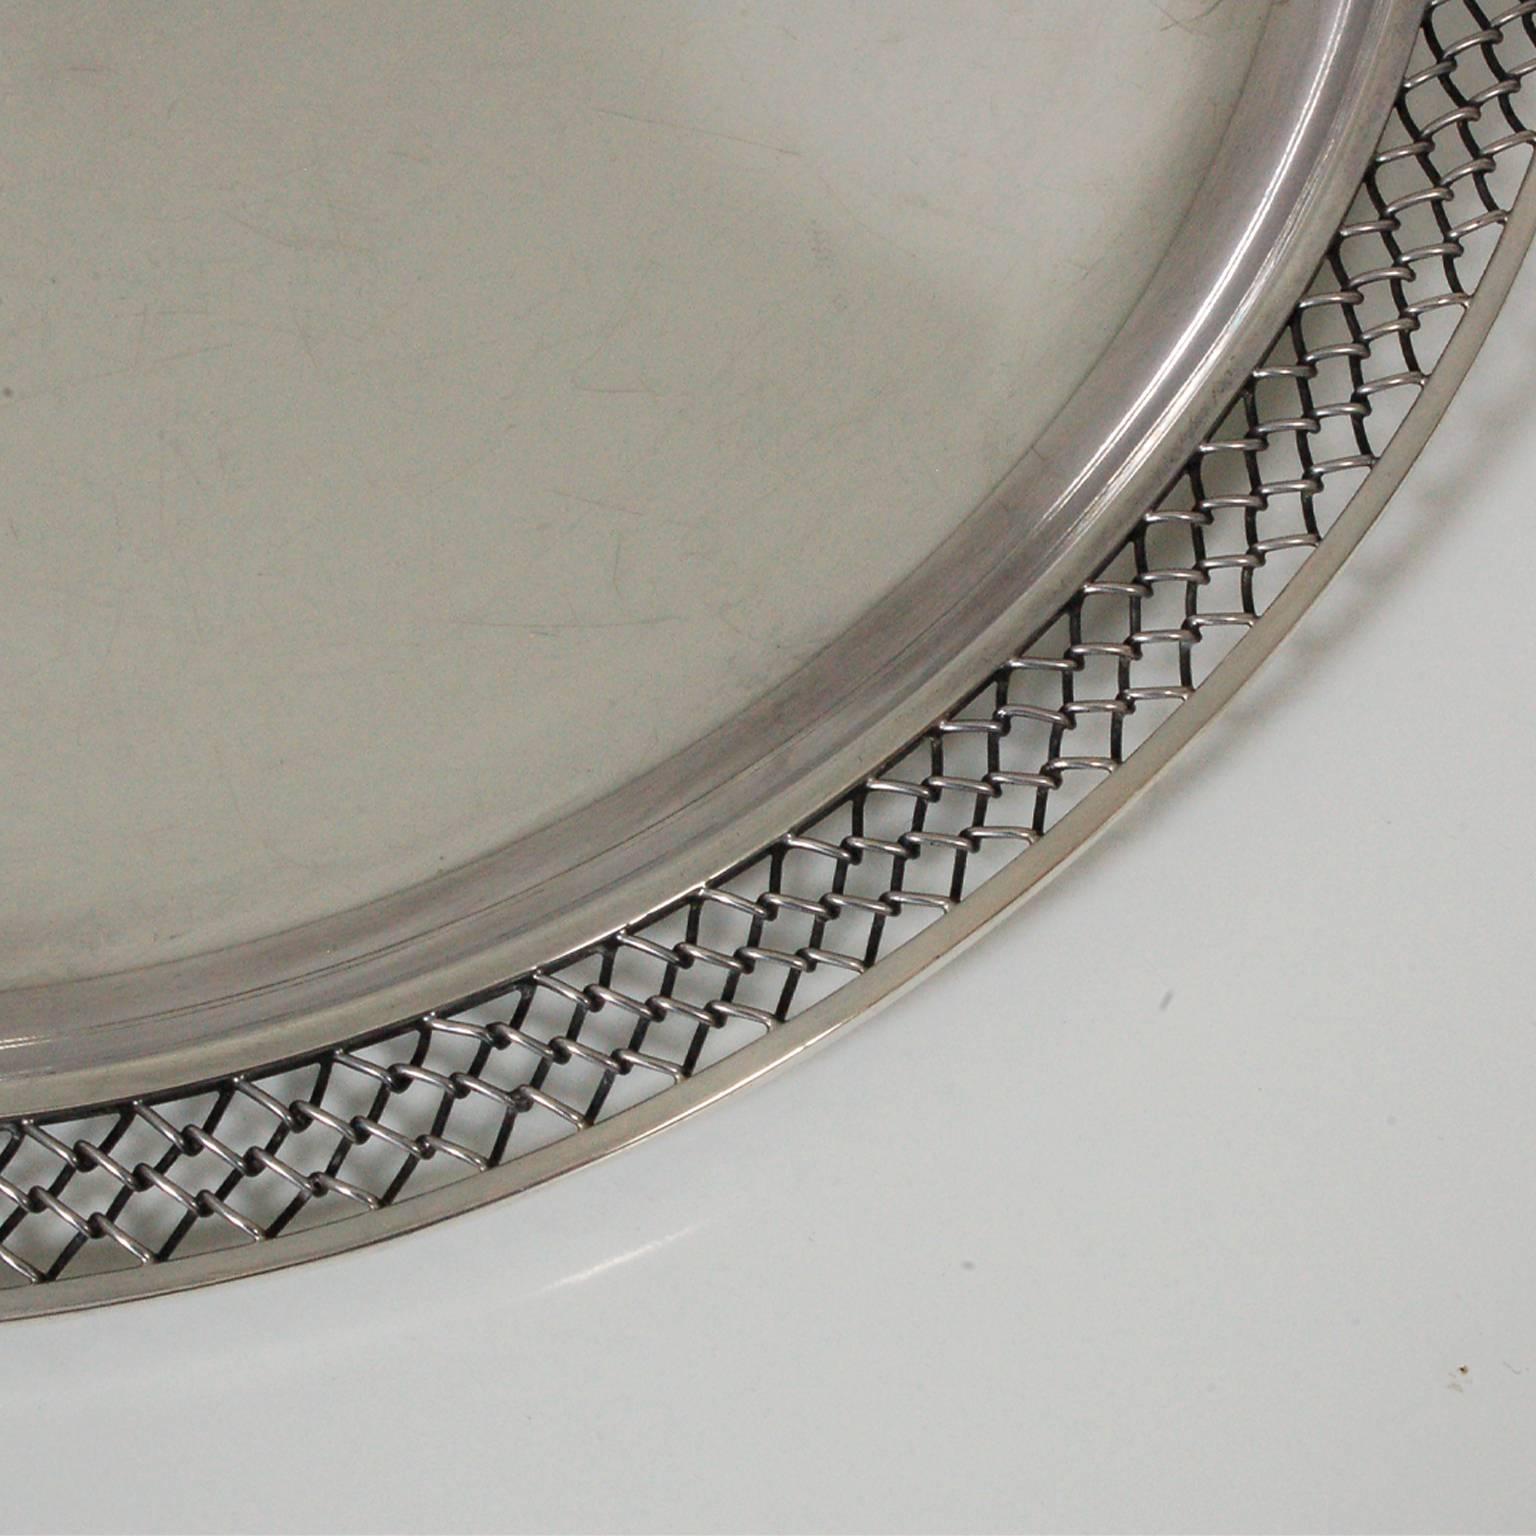 Large platter or tray designed by Svend Weihrauch for Hingelberg Studios. Sterling silver hammer made, with polished top. Chain link decoration edging, stamped on bottom with manufacturer's and silver mark.
Silver weight 3.3 kg/7.2 lbs.